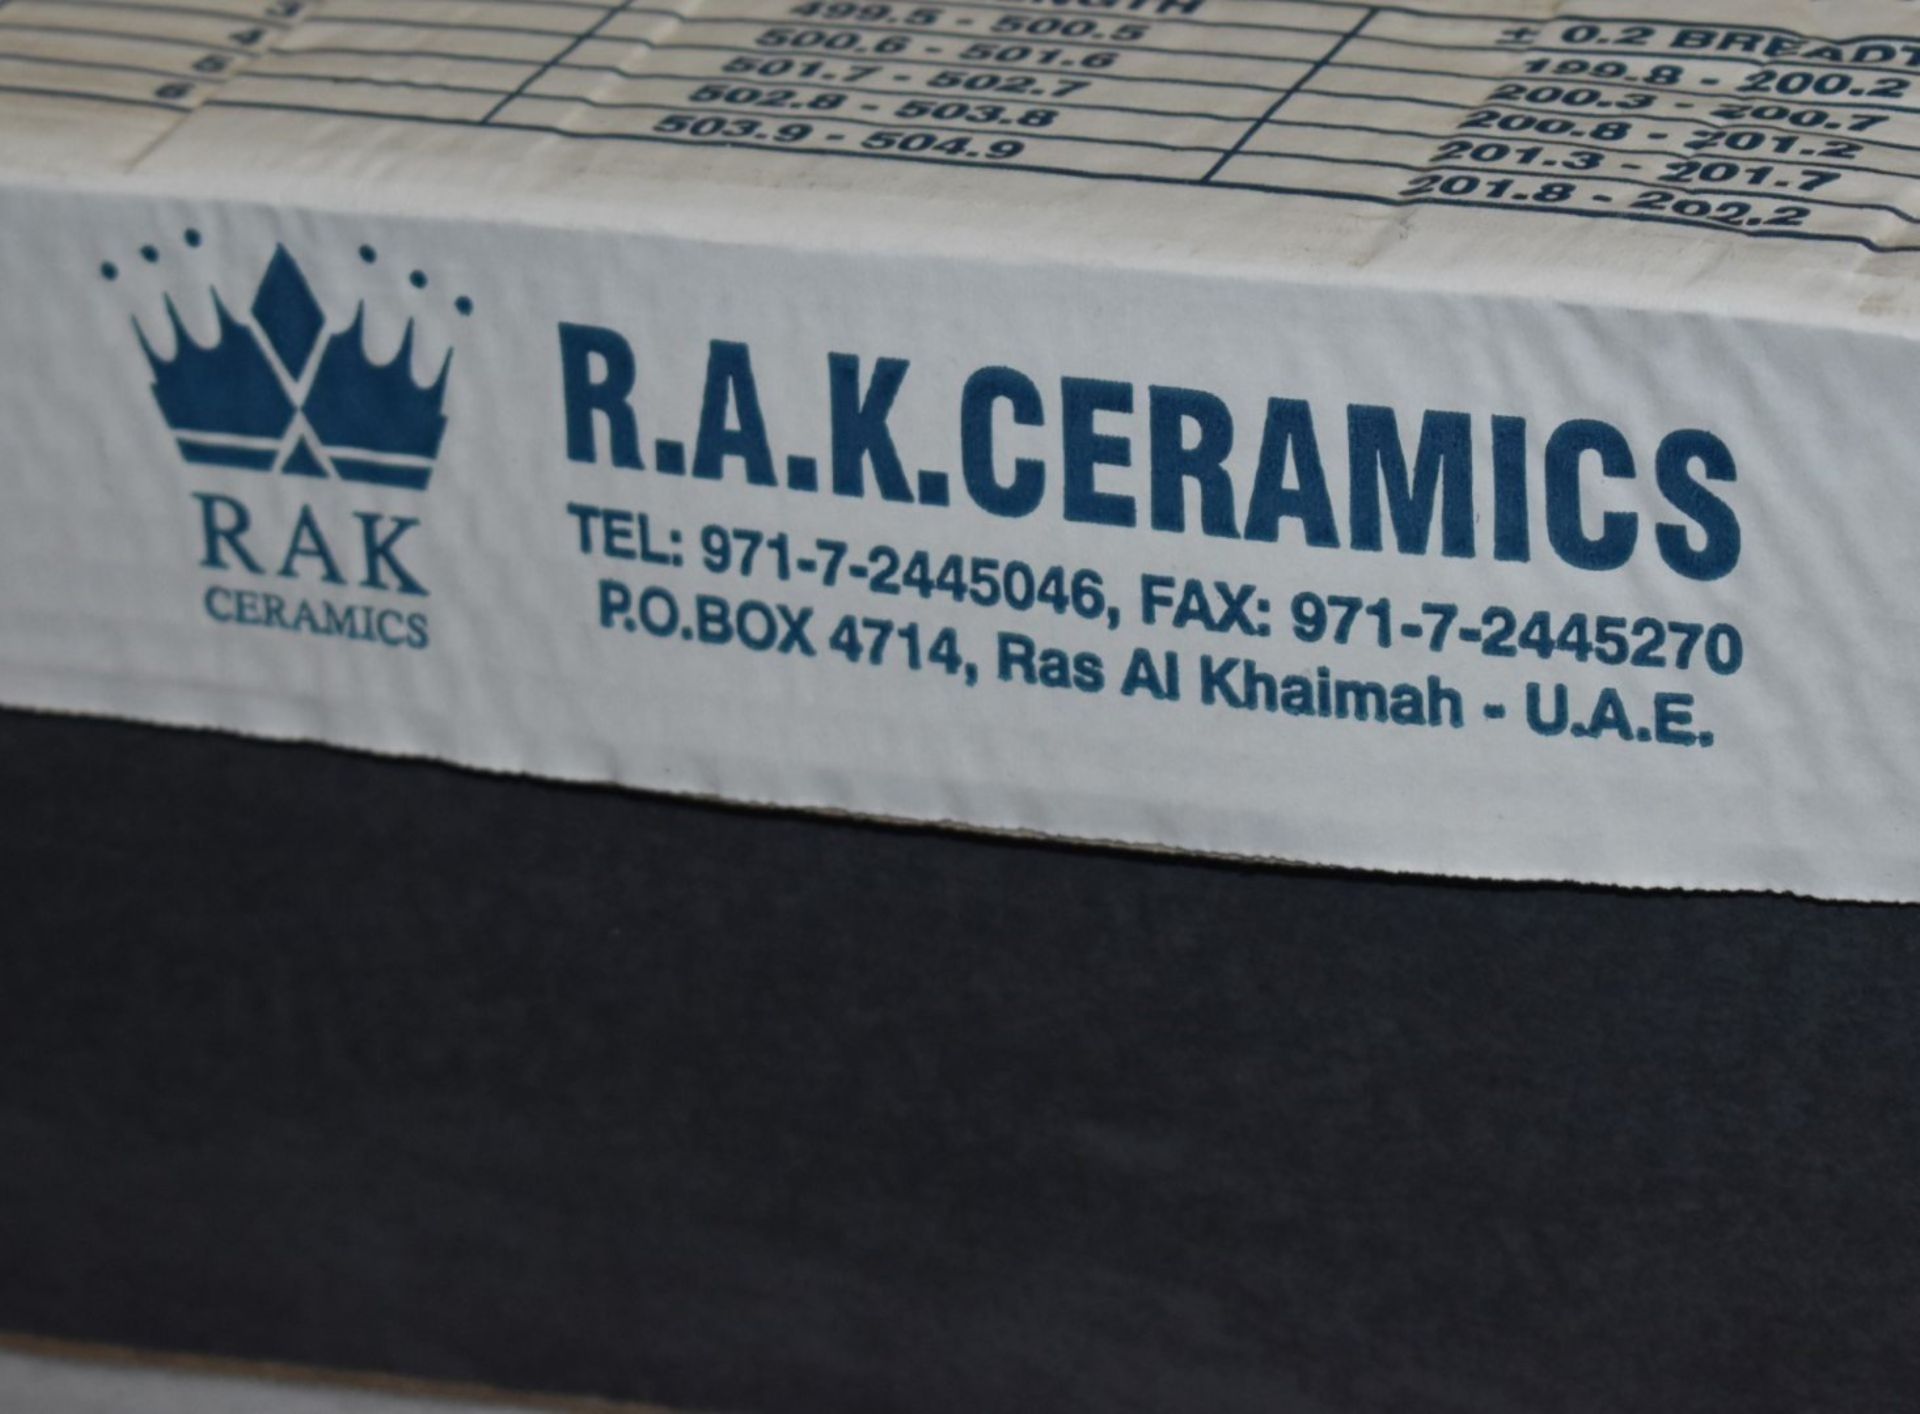 18 x Boxes of RAK Porcelain Floor or Wall Tiles - Dolomite Black - 20 x 50 cm Tiles Covering a Total - Image 9 of 9